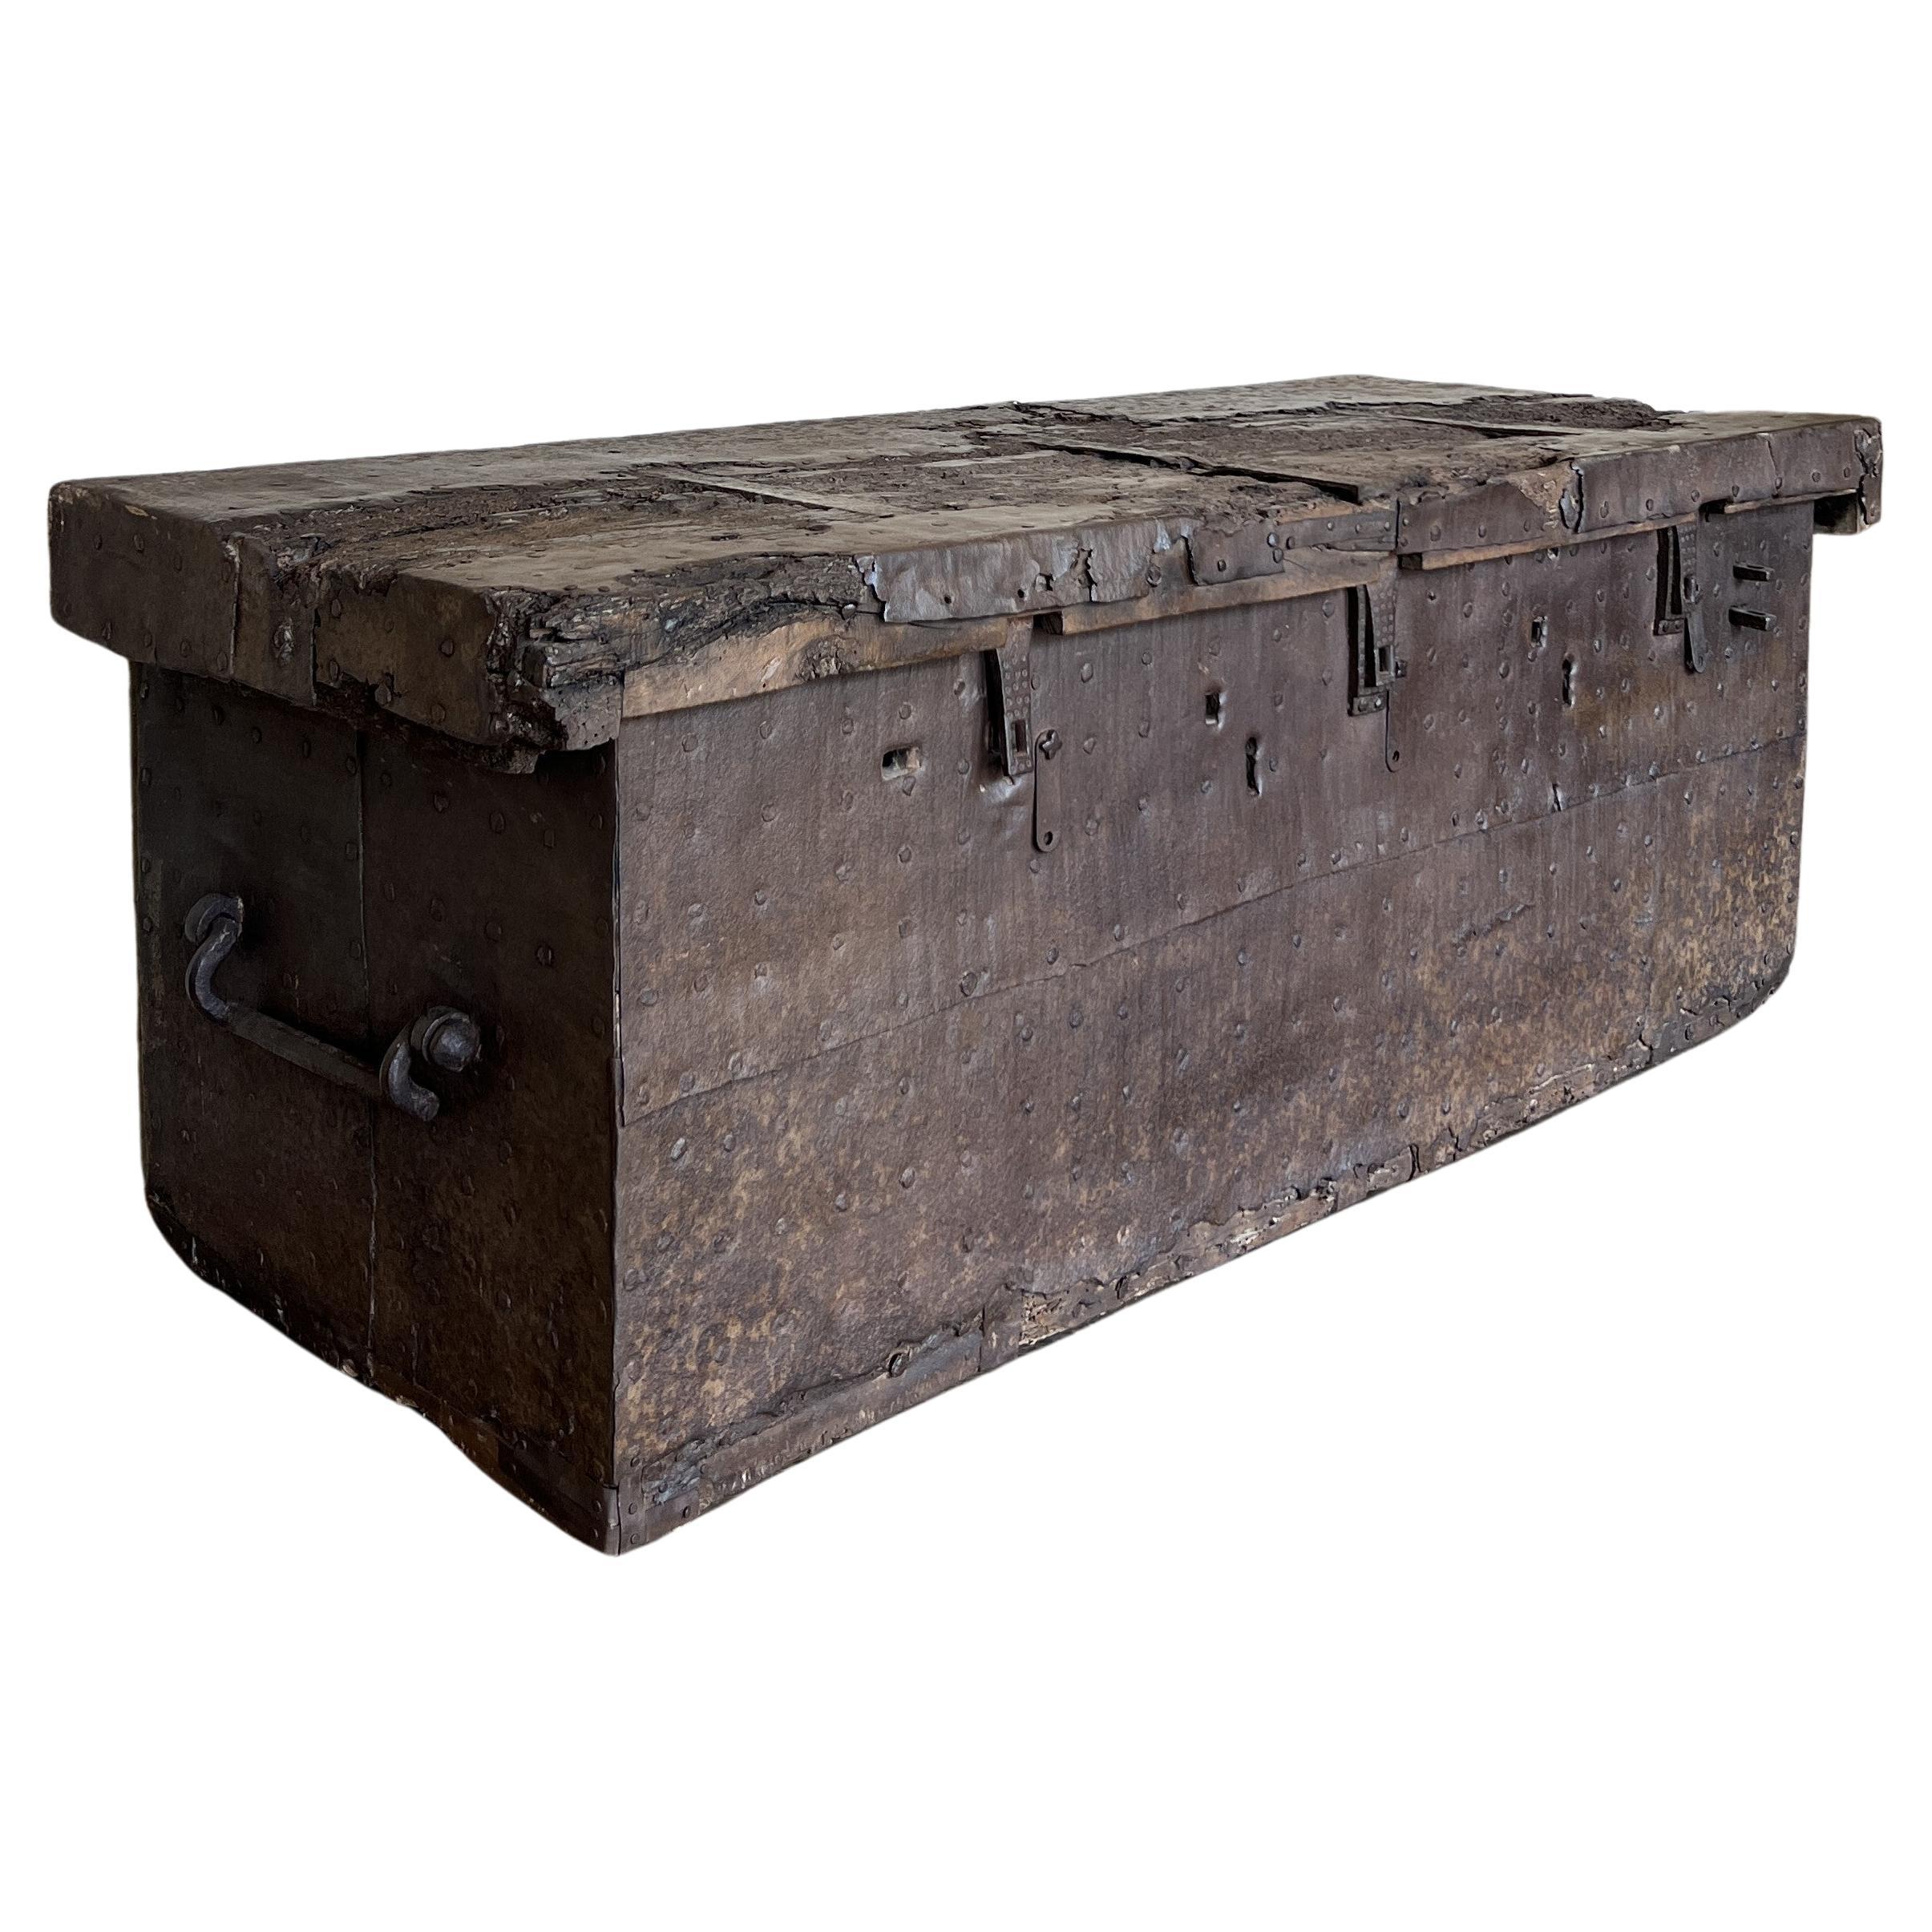 16th century large chest strongbox iron and walnut